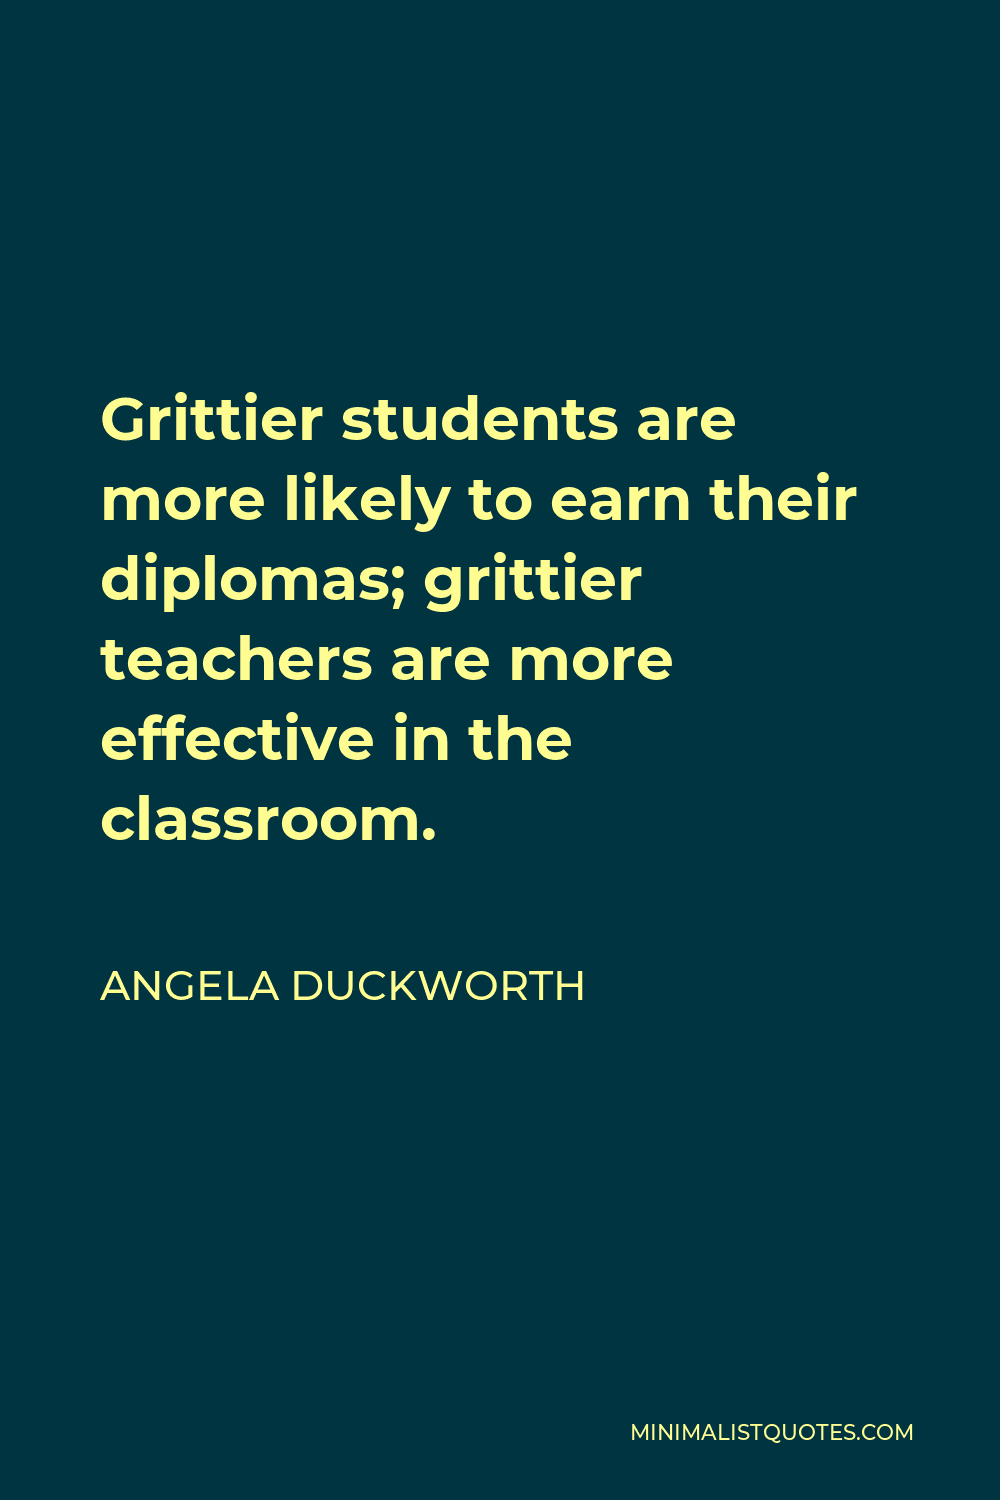 Angela Duckworth Quote - Grittier students are more likely to earn their diplomas; grittier teachers are more effective in the classroom.